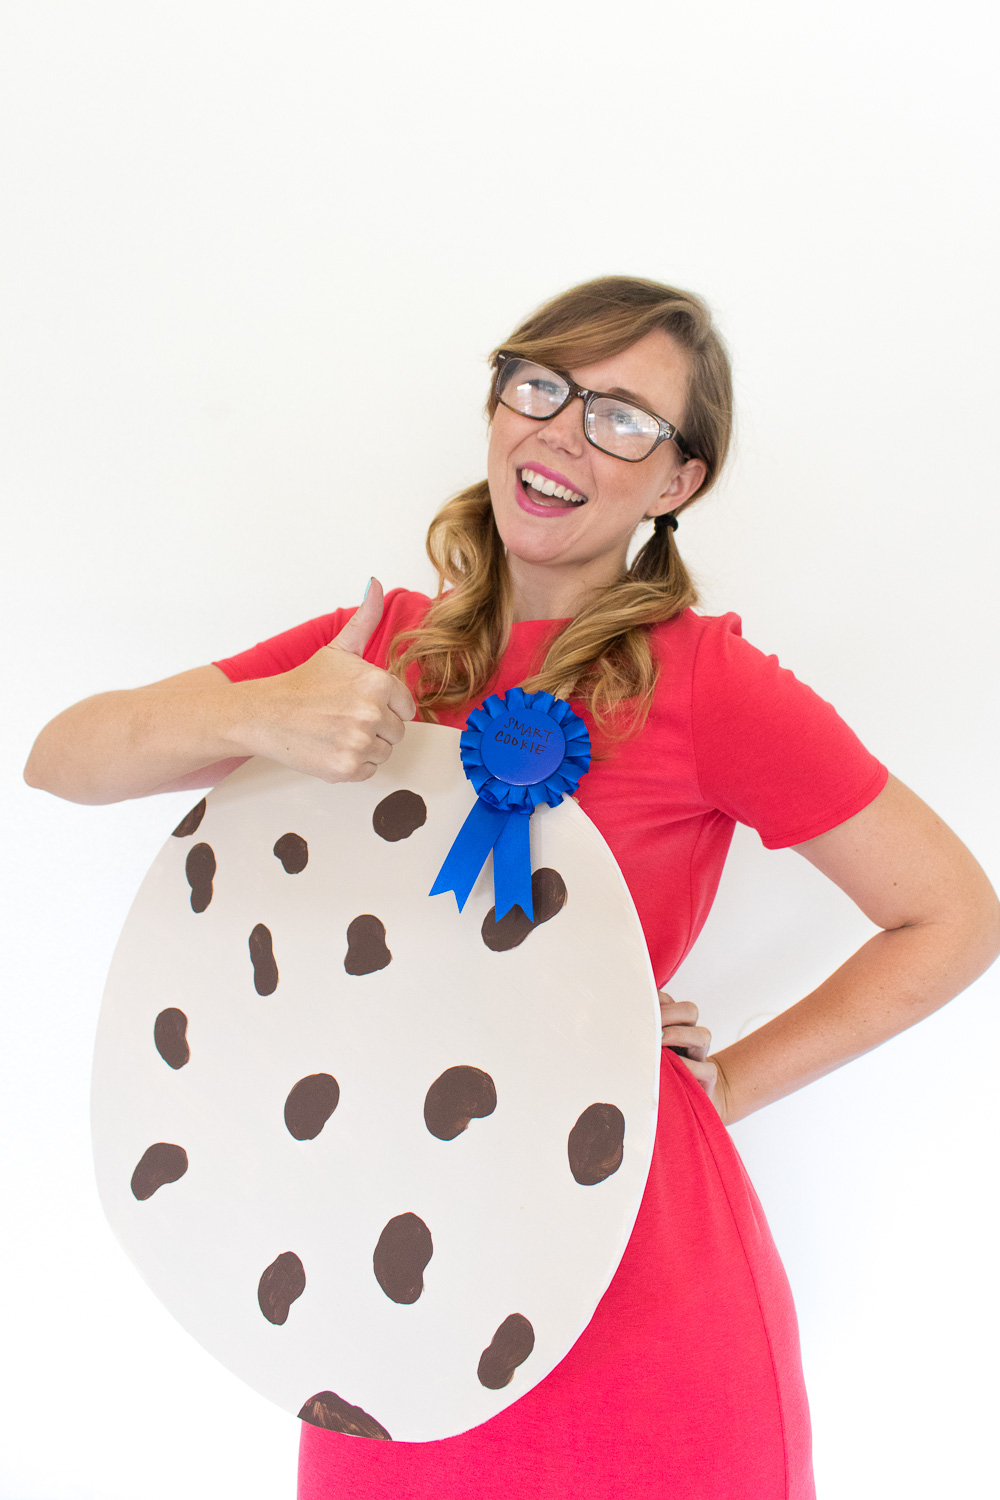 4 Last-Minute Idiom Halloween Costumes | Club Crafted